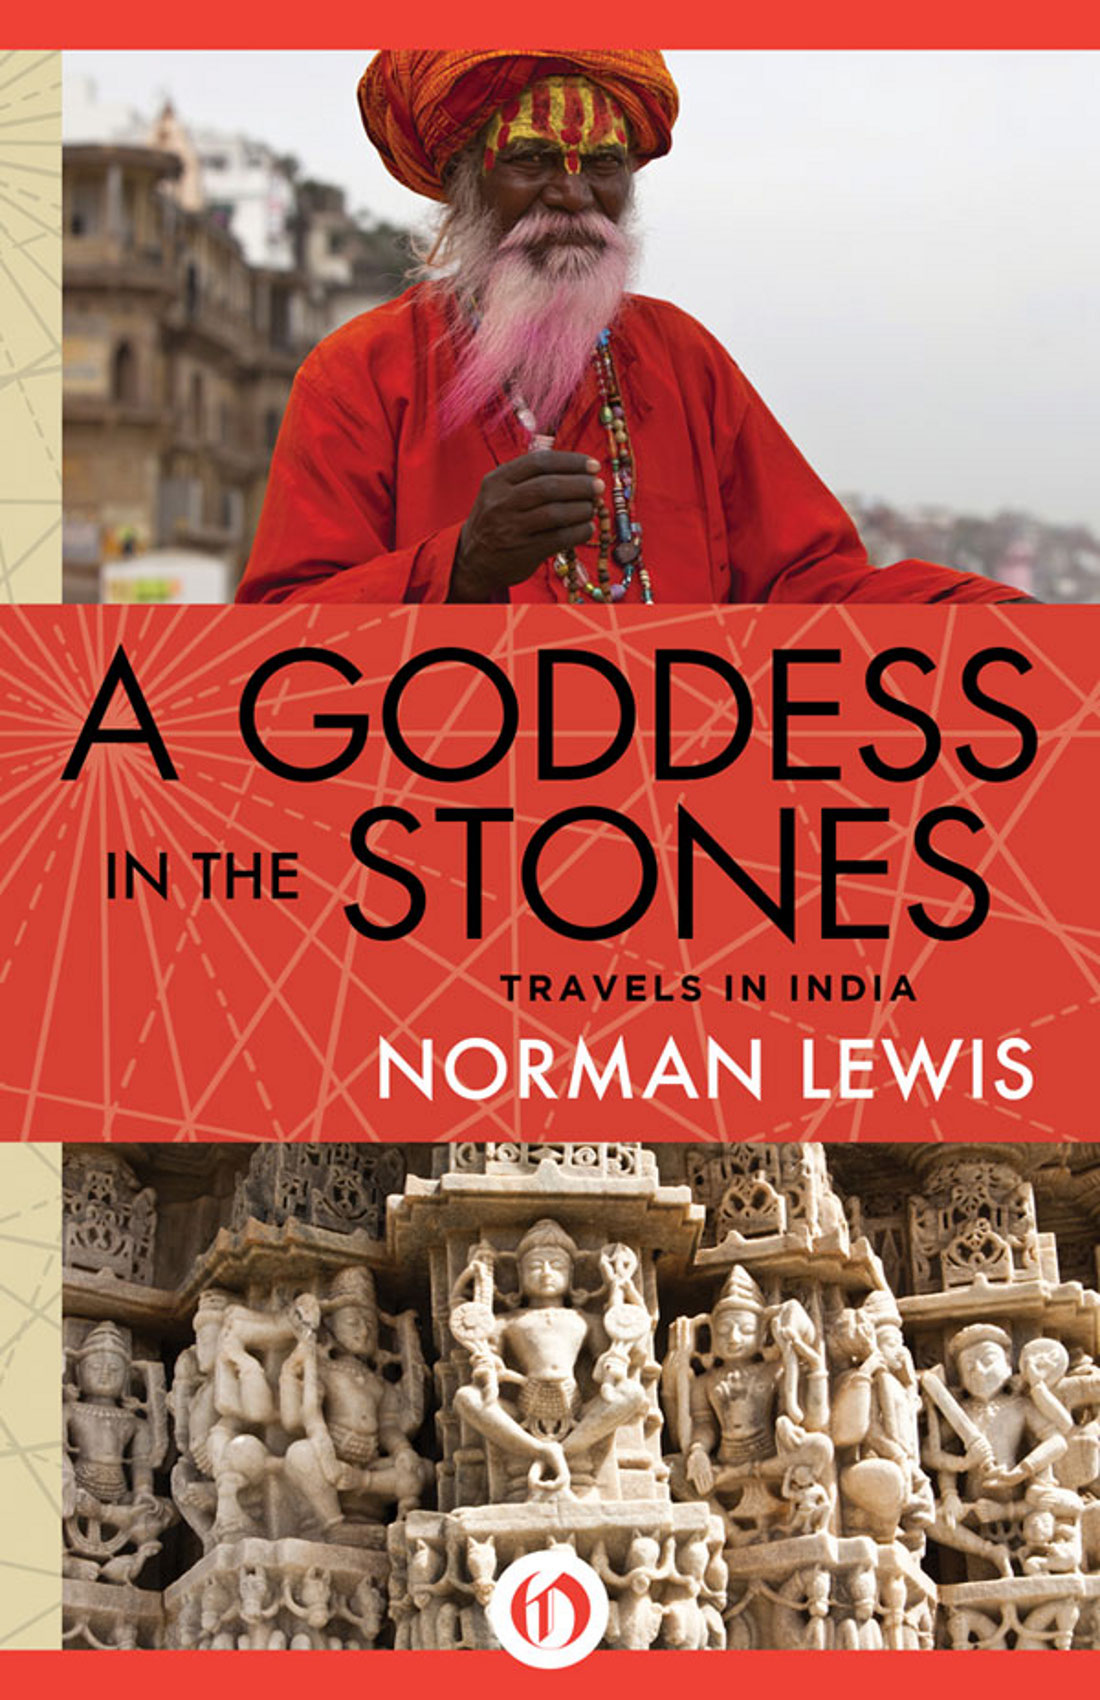 A Goddess in the Stones Travels in India Norman Lewis Preface IT WAS NOT - photo 1